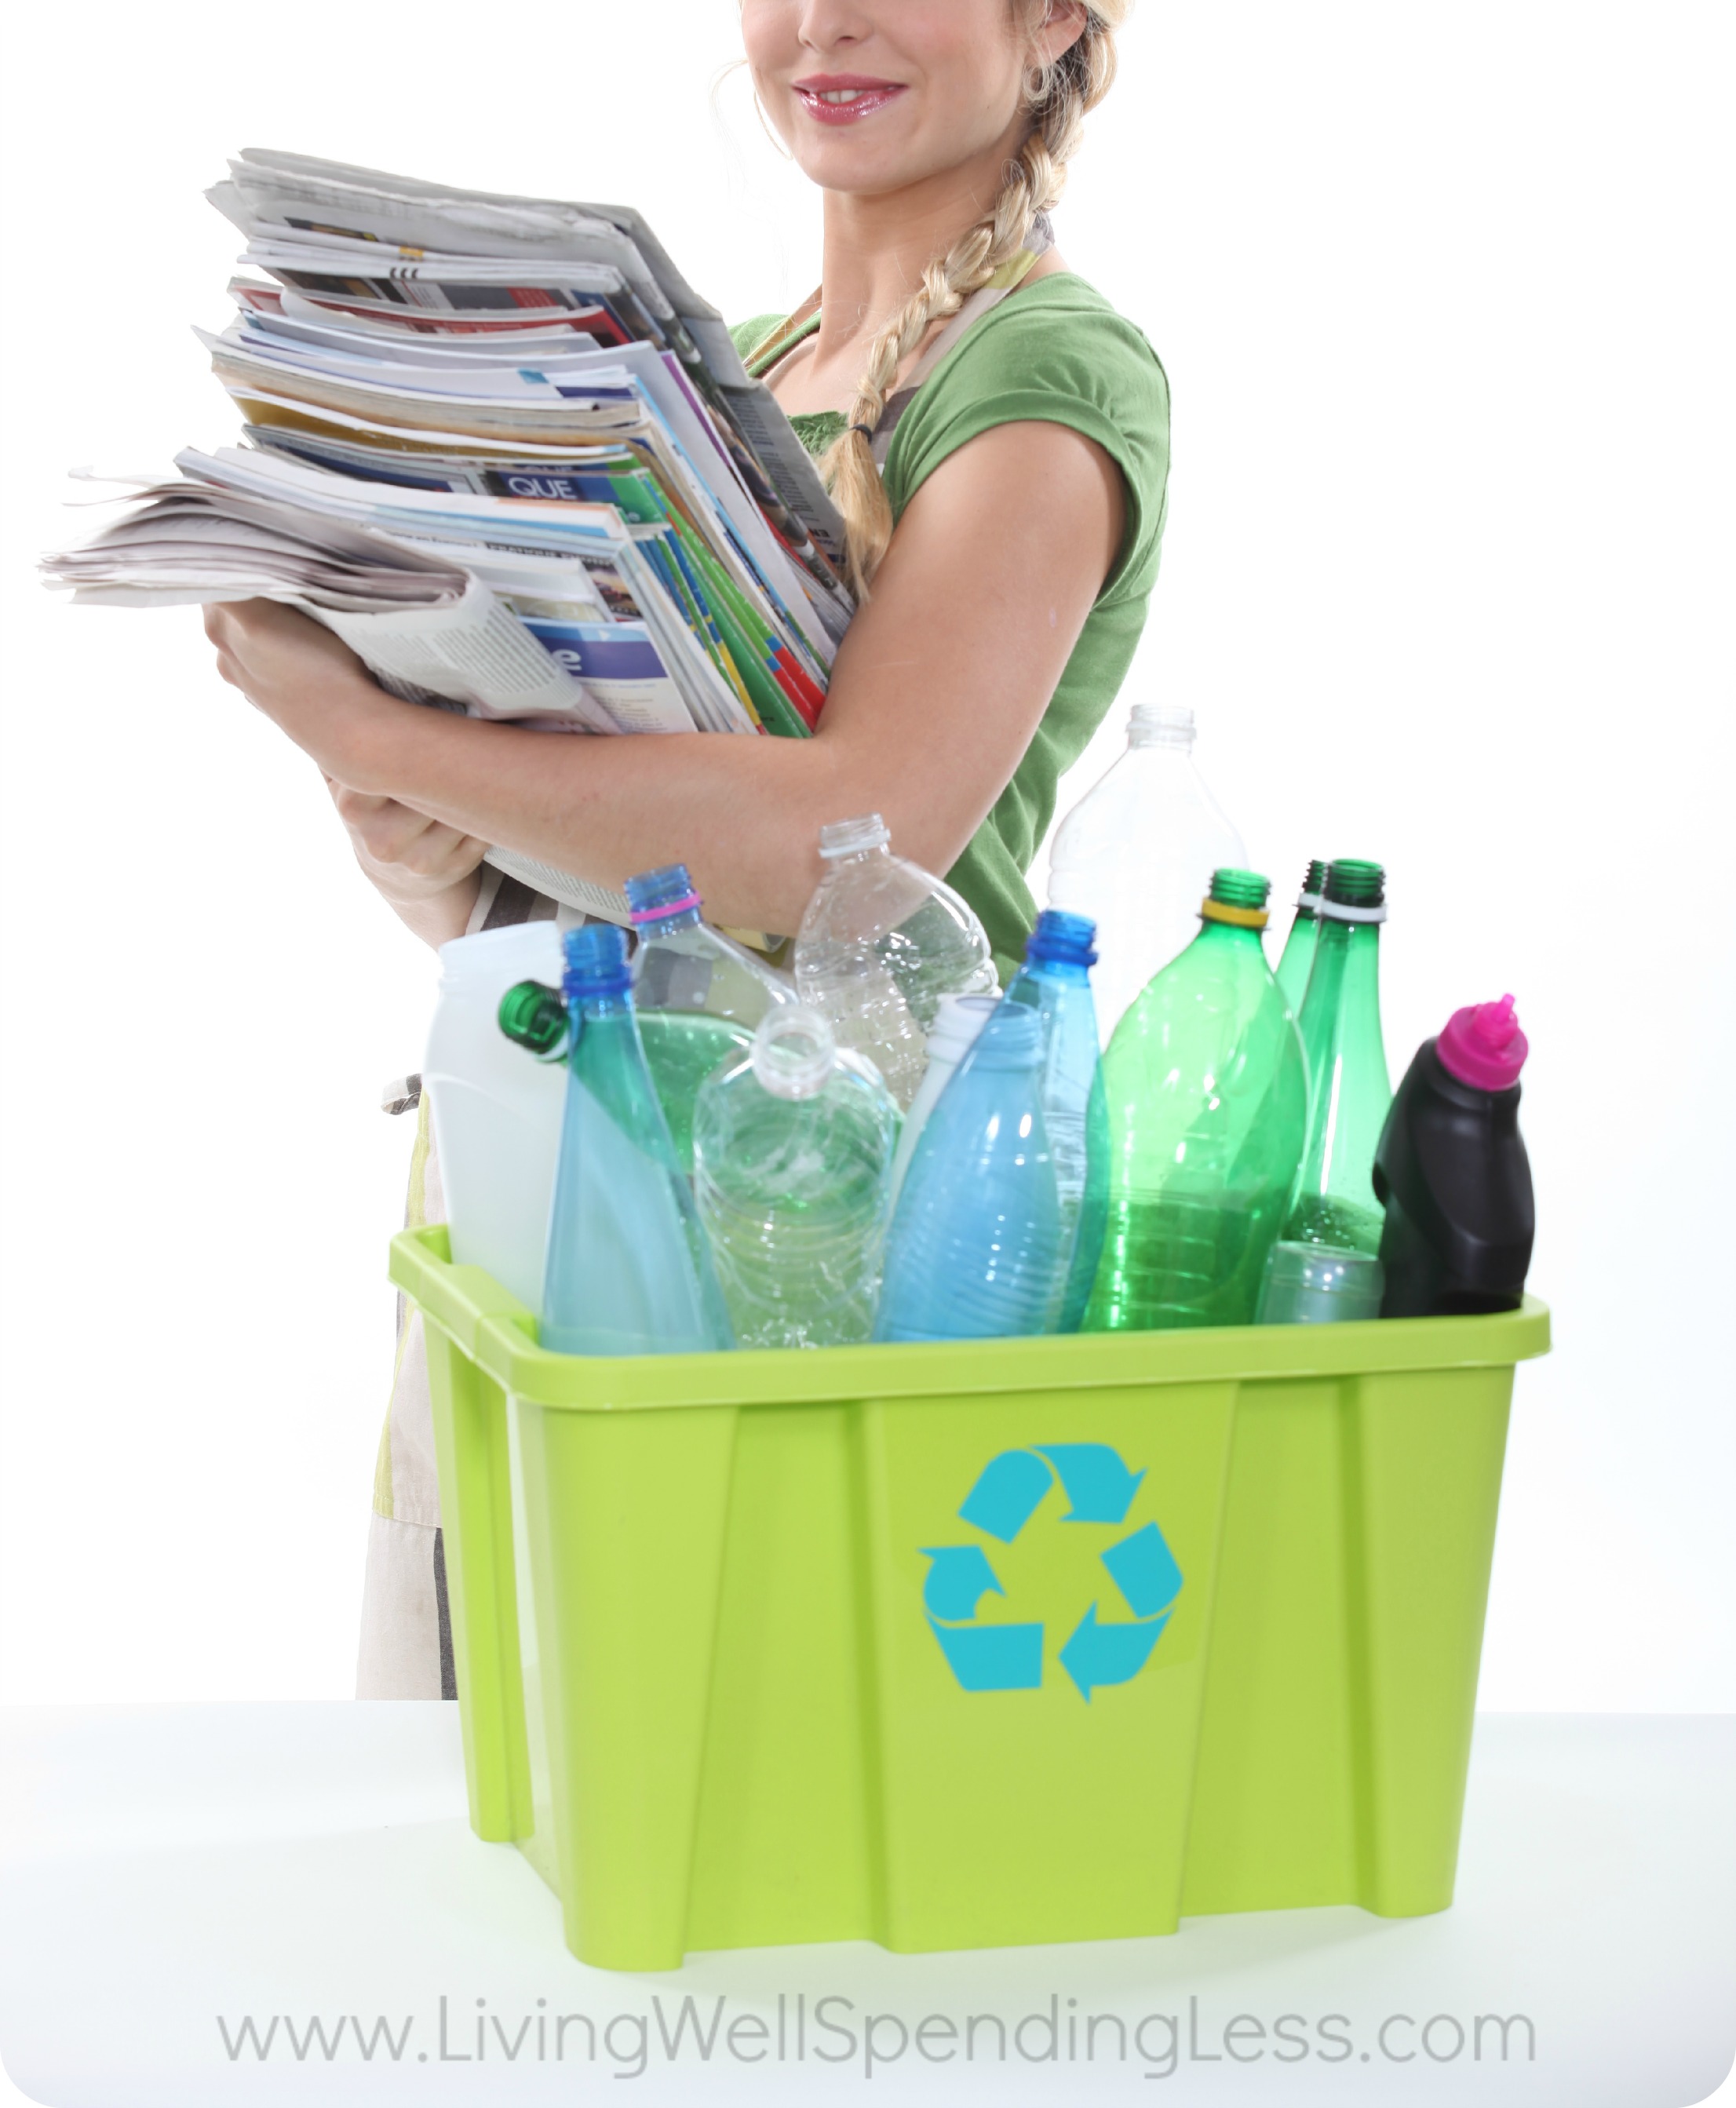 Magazines can be recycled. Look through recycle bins to see if you can find any discarded magazines to flip through!